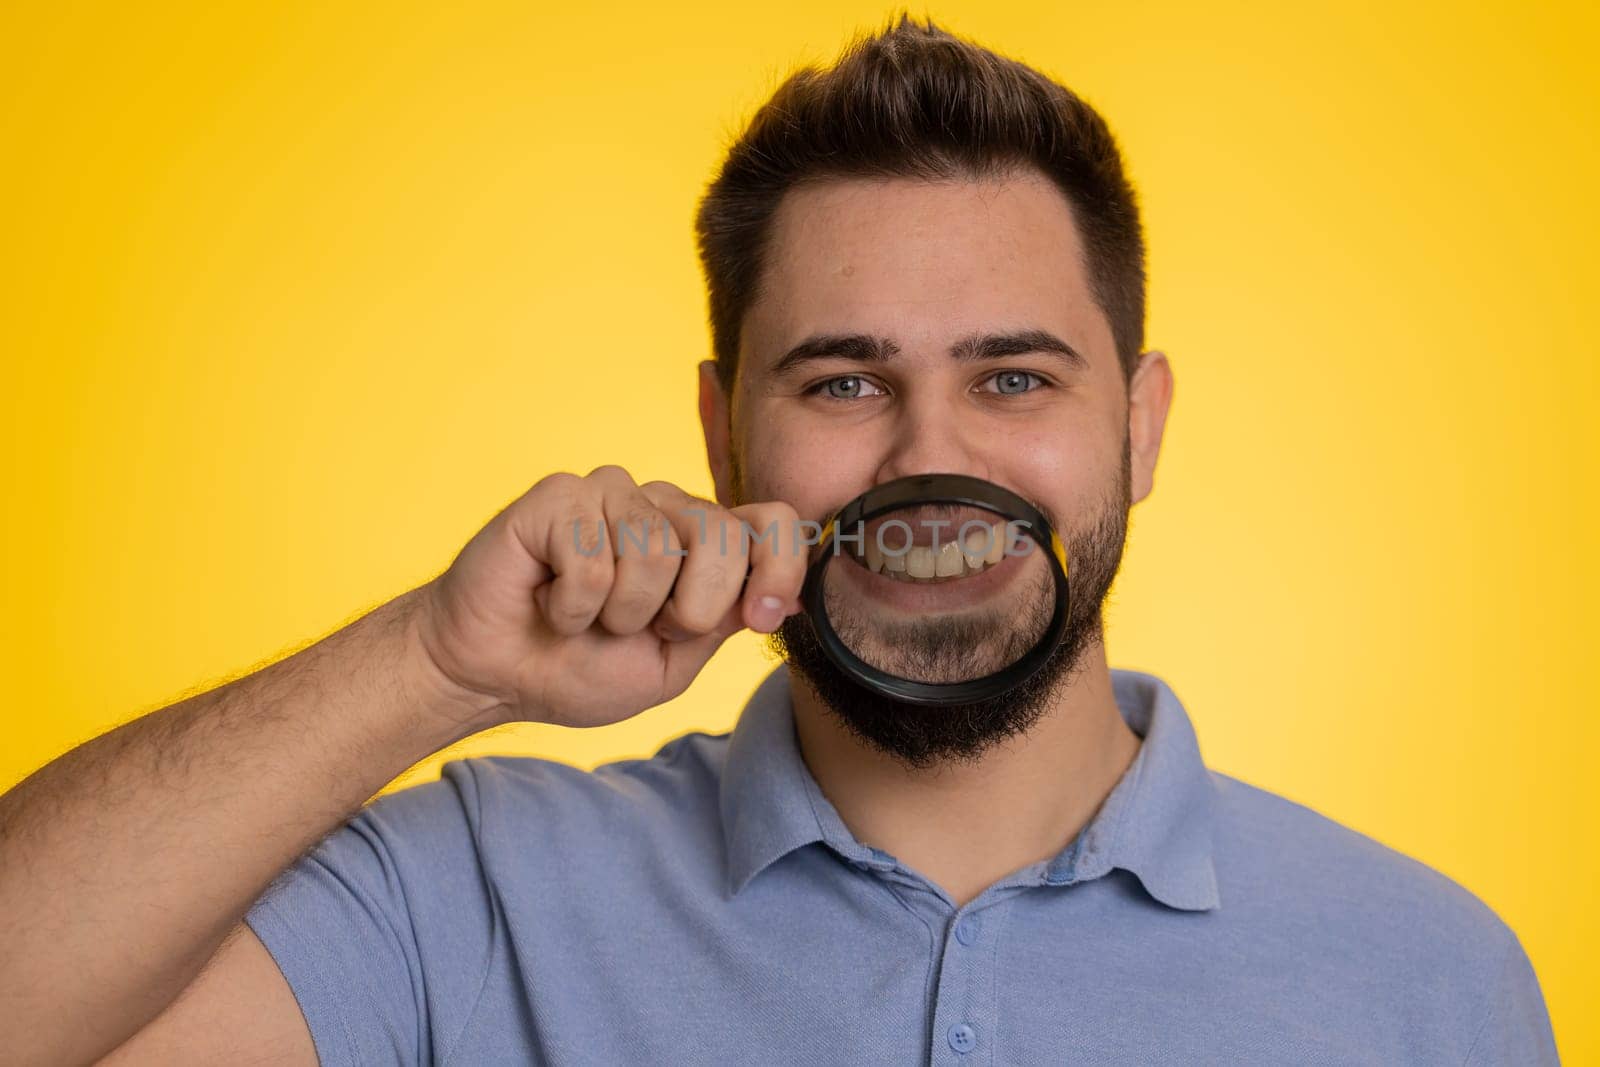 Caucasian man holding magnifier glass on healthy white teeth, looking at camera with happy expression, showing funny silly face smiling mouth. Handsome young guy isolated on yellow studio background